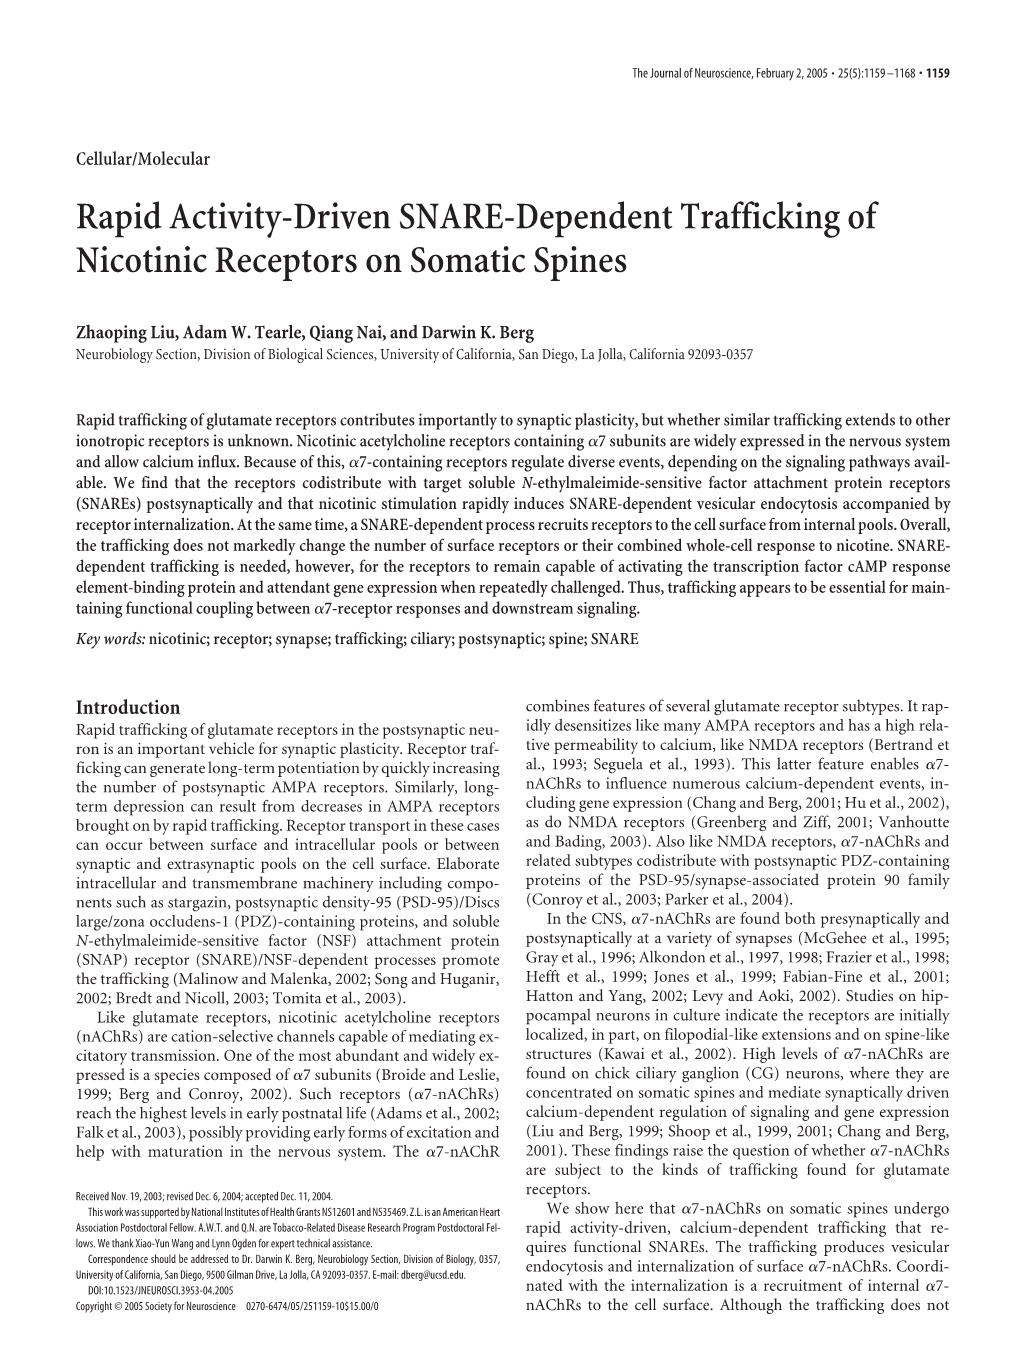 Rapid Activity-Driven SNARE-Dependent Trafficking of Nicotinic Receptors on Somatic Spines